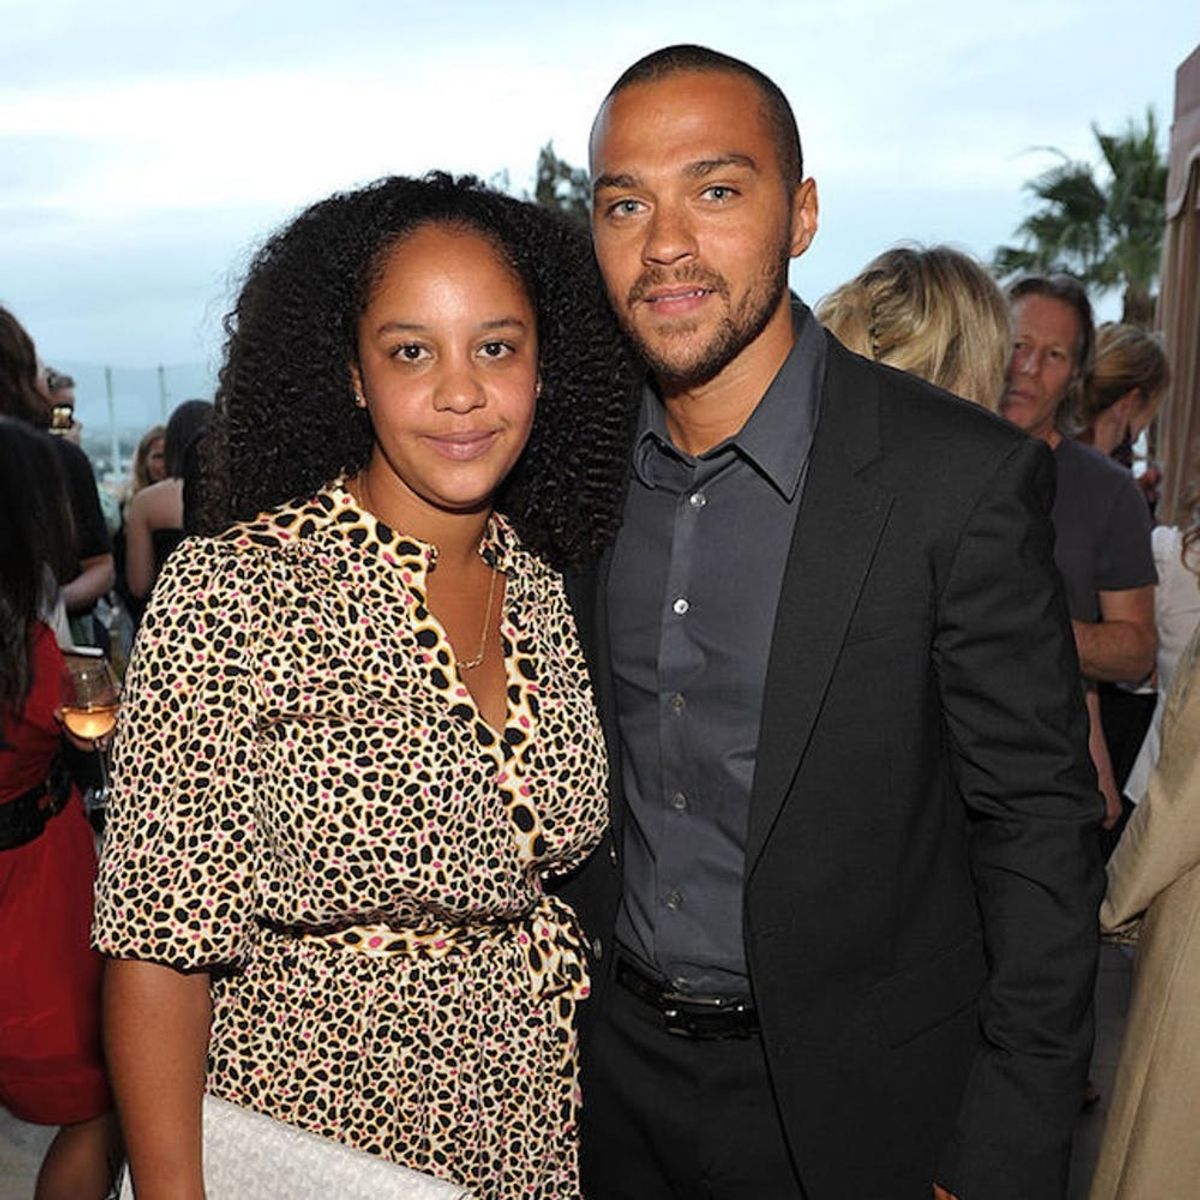 Morning Buzz! Greys Anatomy Star Jesse Williams and His Wife are Divorcing and People are Shook + More